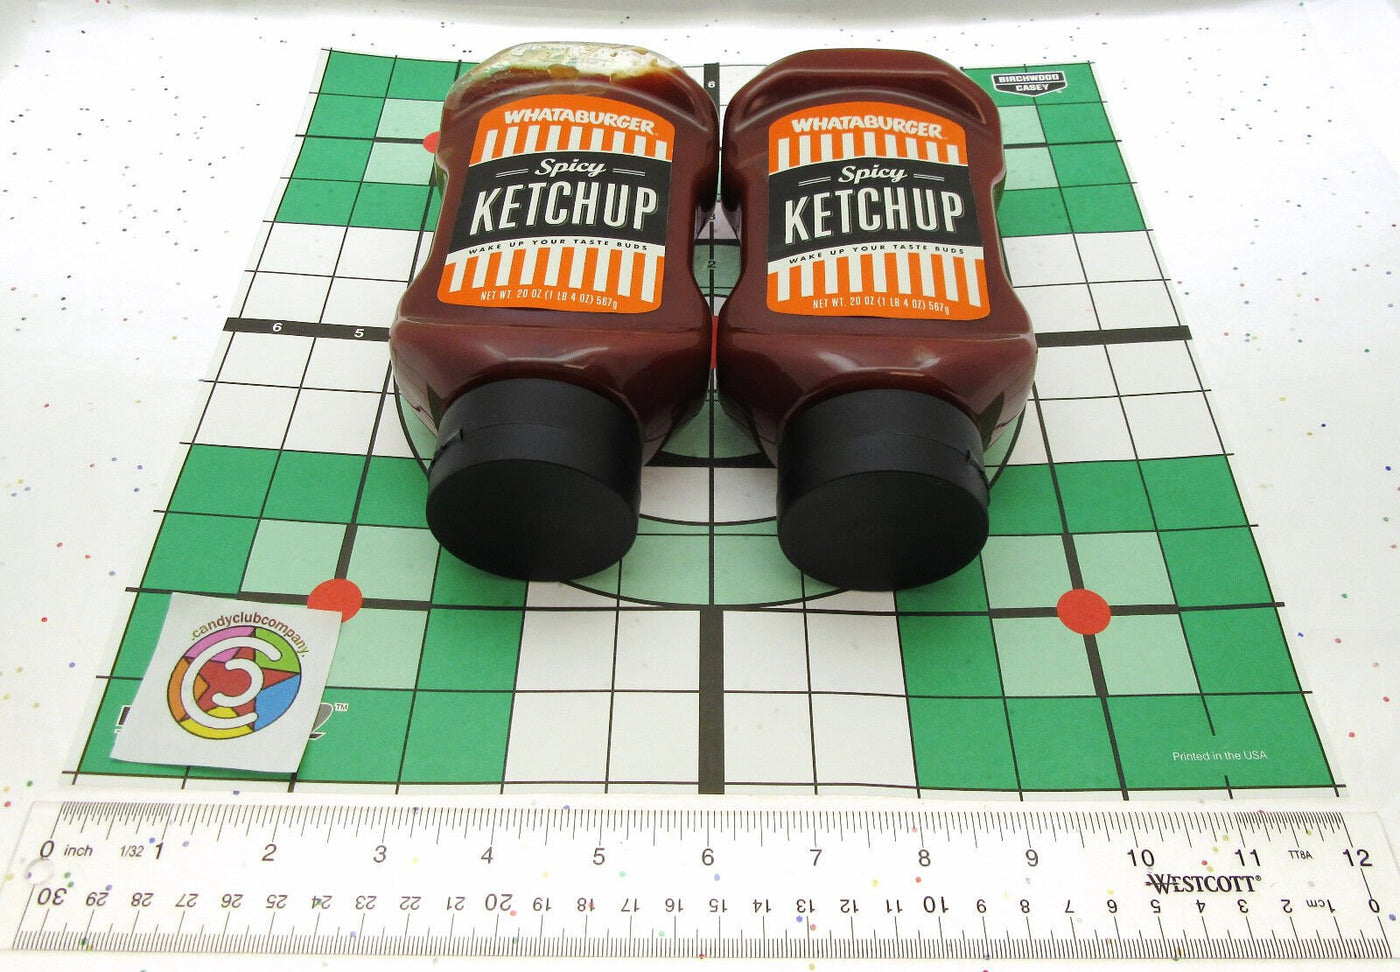 Whataburger Spicy Ketchup 20oz Bottle Lot of 2